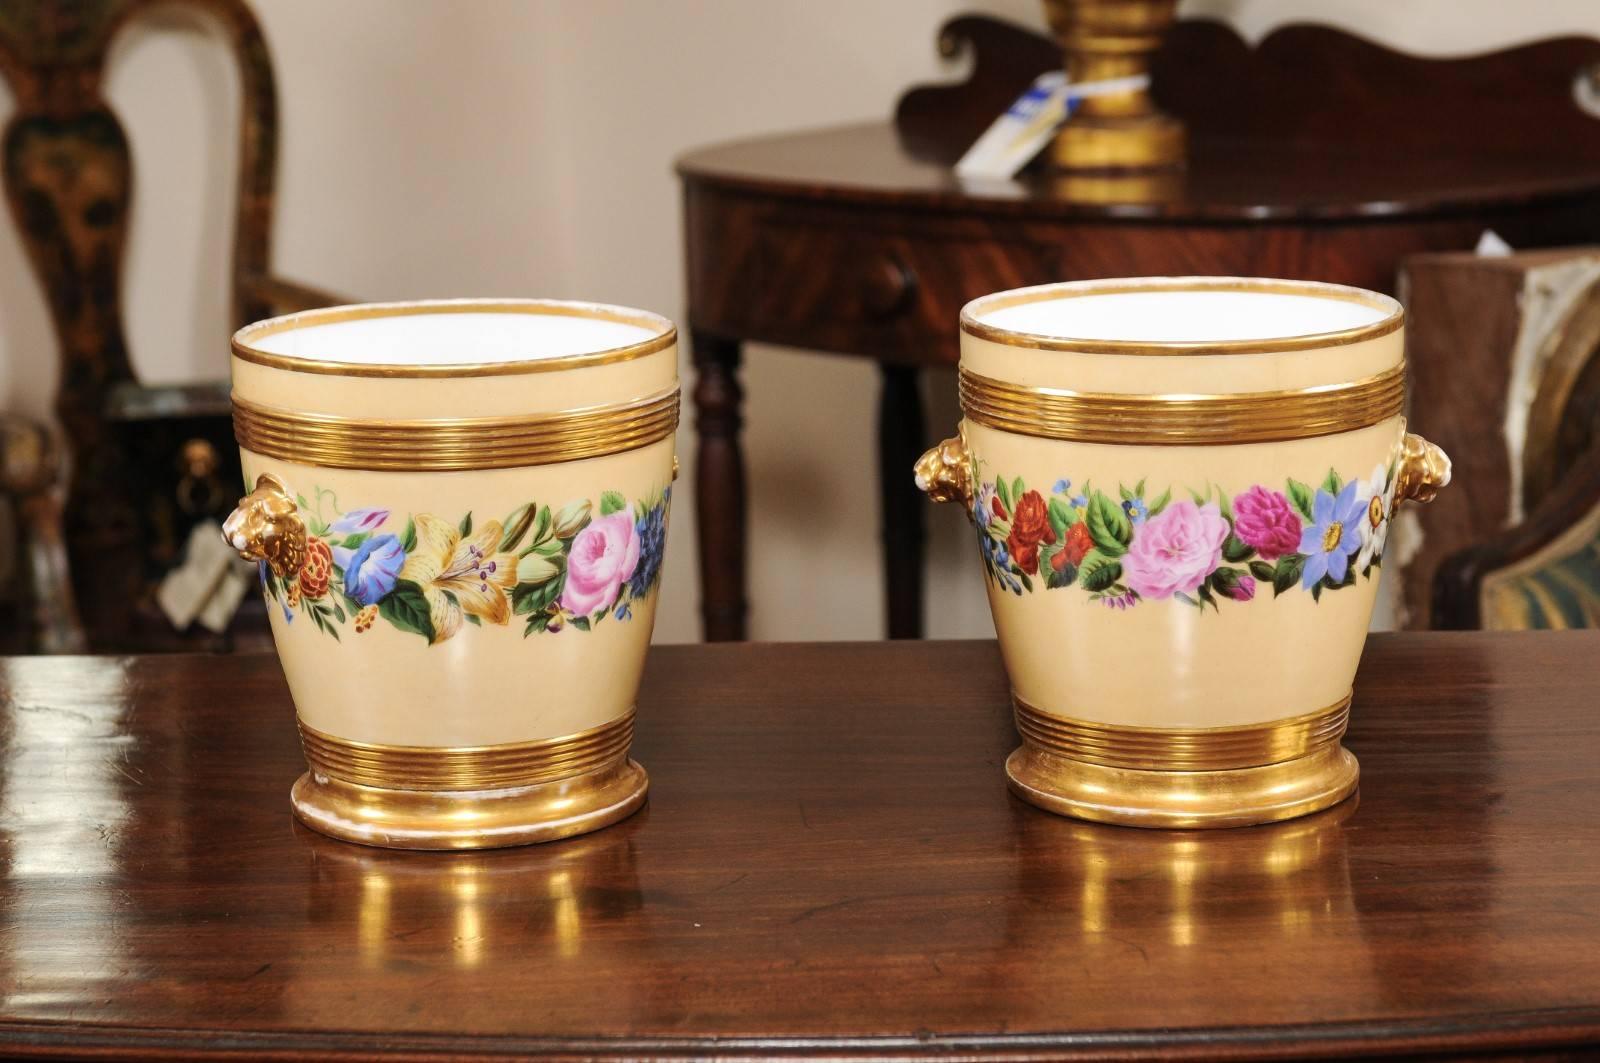 Pair of 19th century Paris Porcelain cachepots with yellow ground & floral decoration.